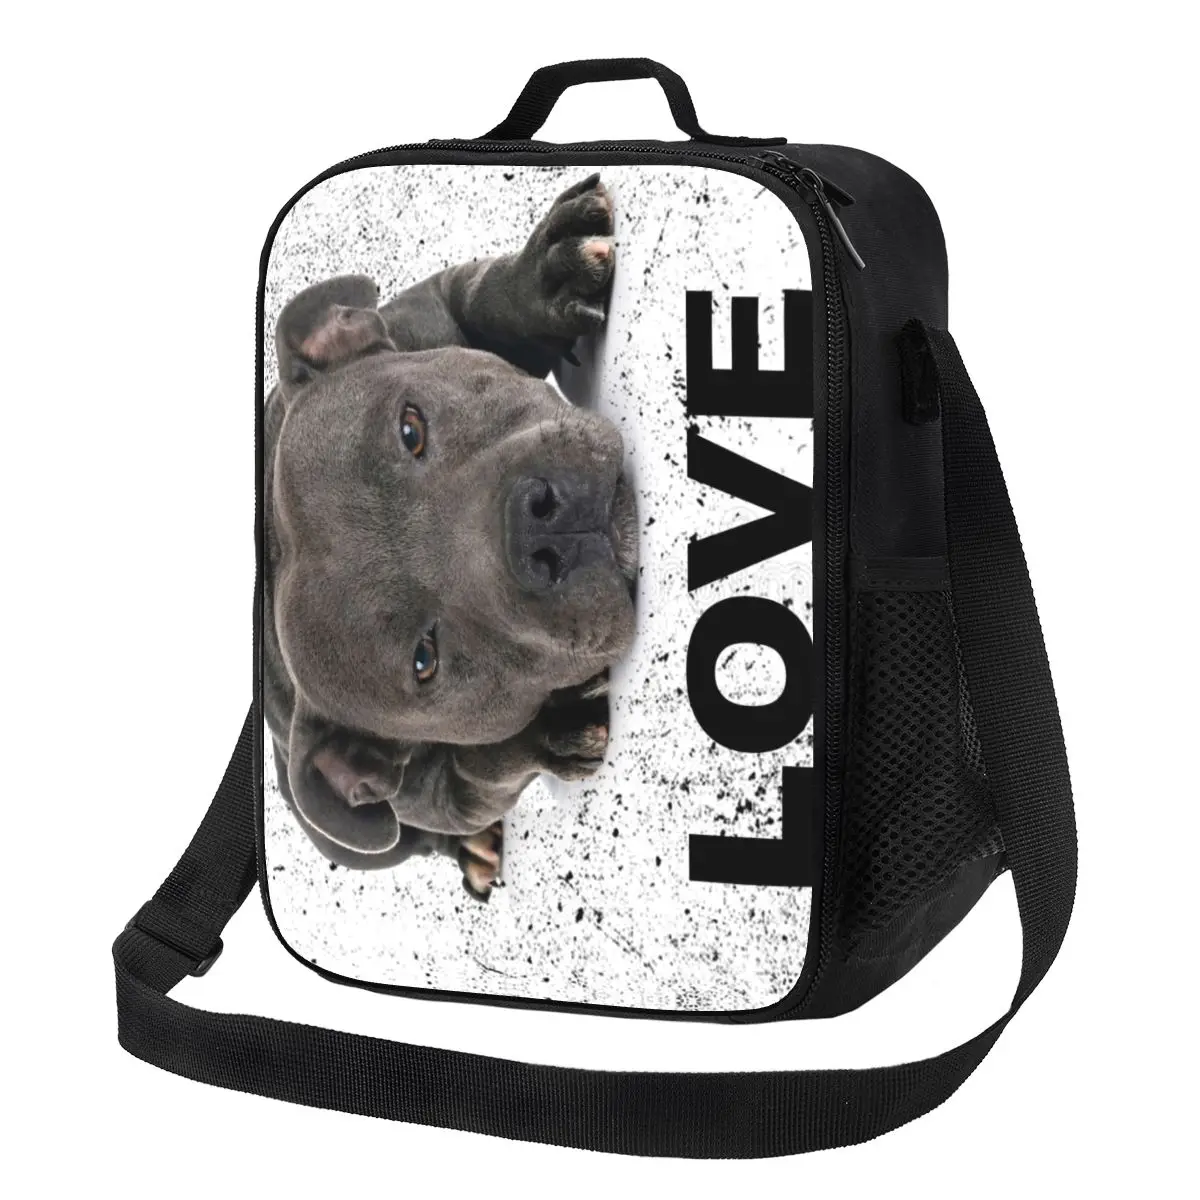 

Cute Staffordshire Bull Terrier Dog Love Thermal Insulated Lunch Bags Women Animal Resuable Lunch Tote for School Bento Food Box